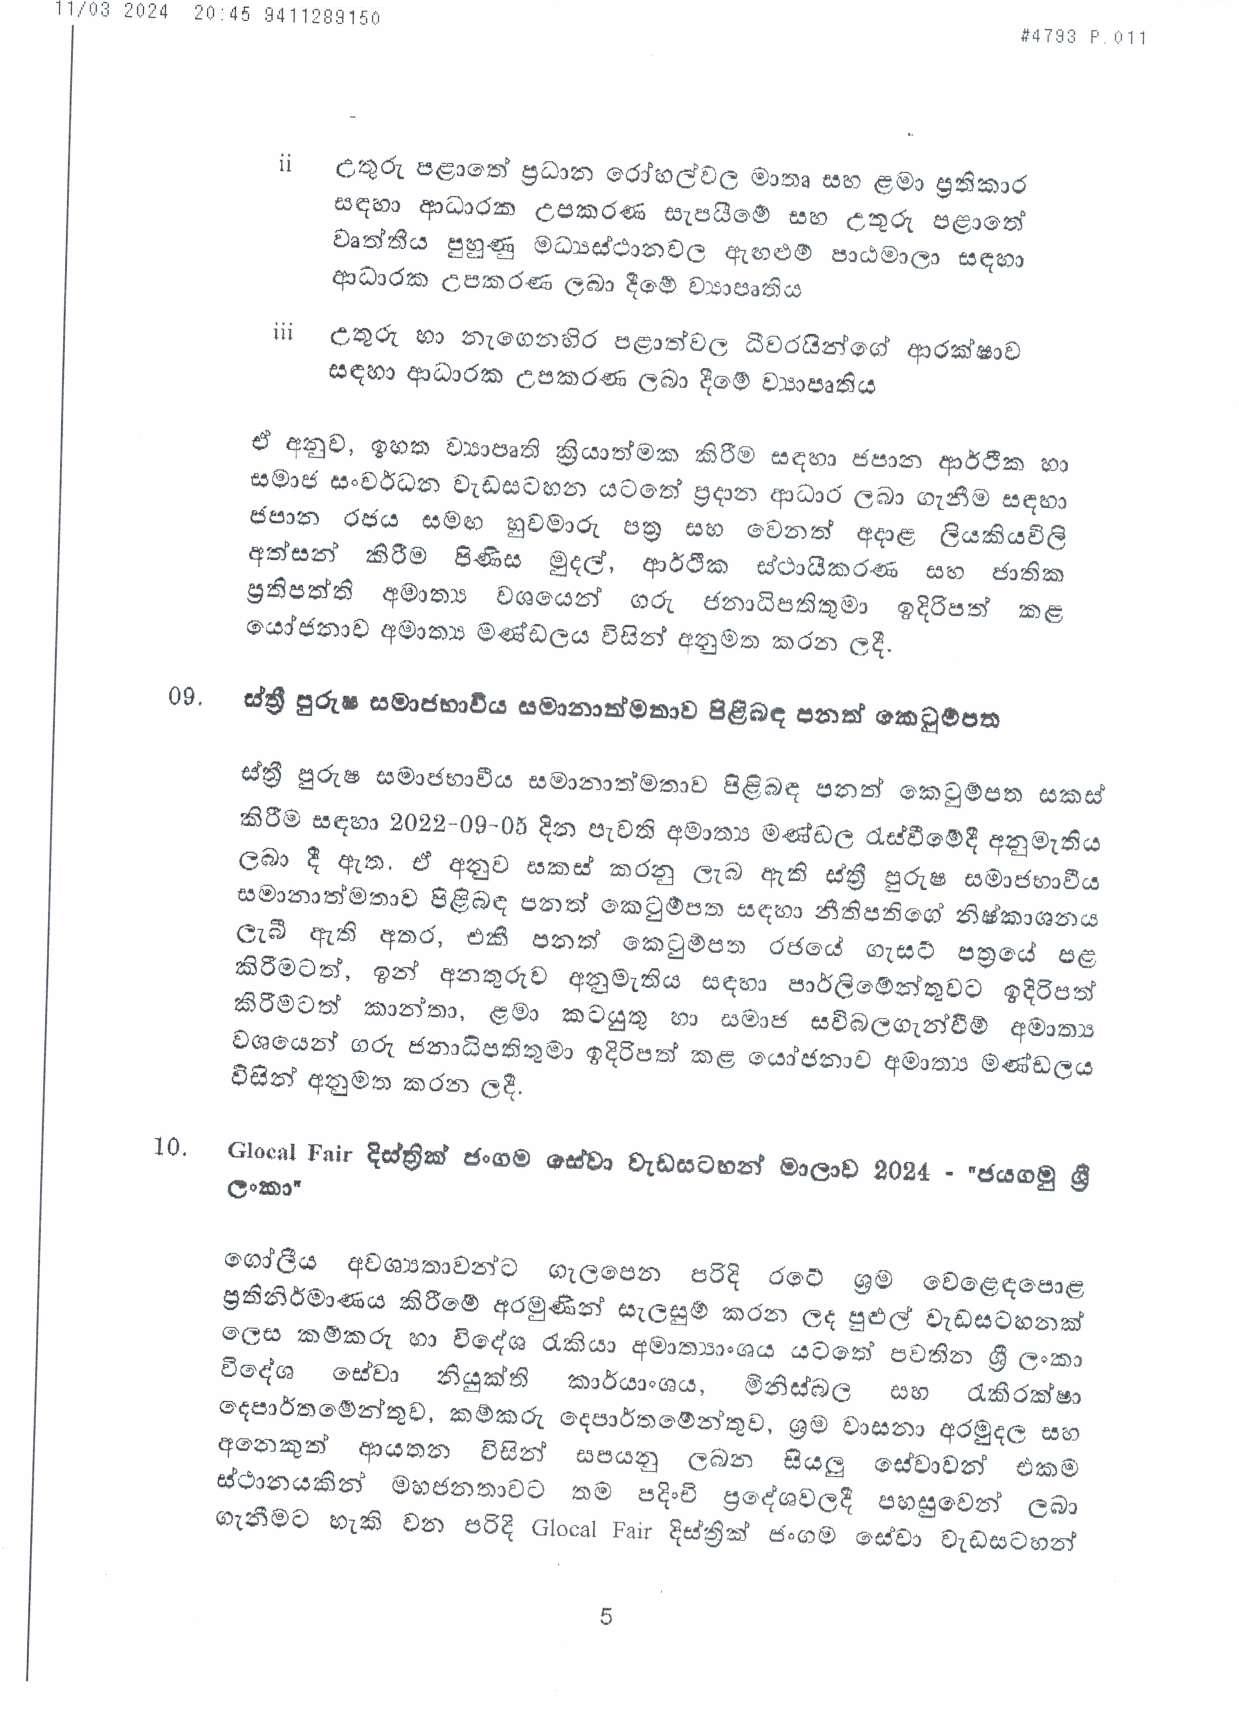 Cabinet Decision on 11.03.2024 page 005